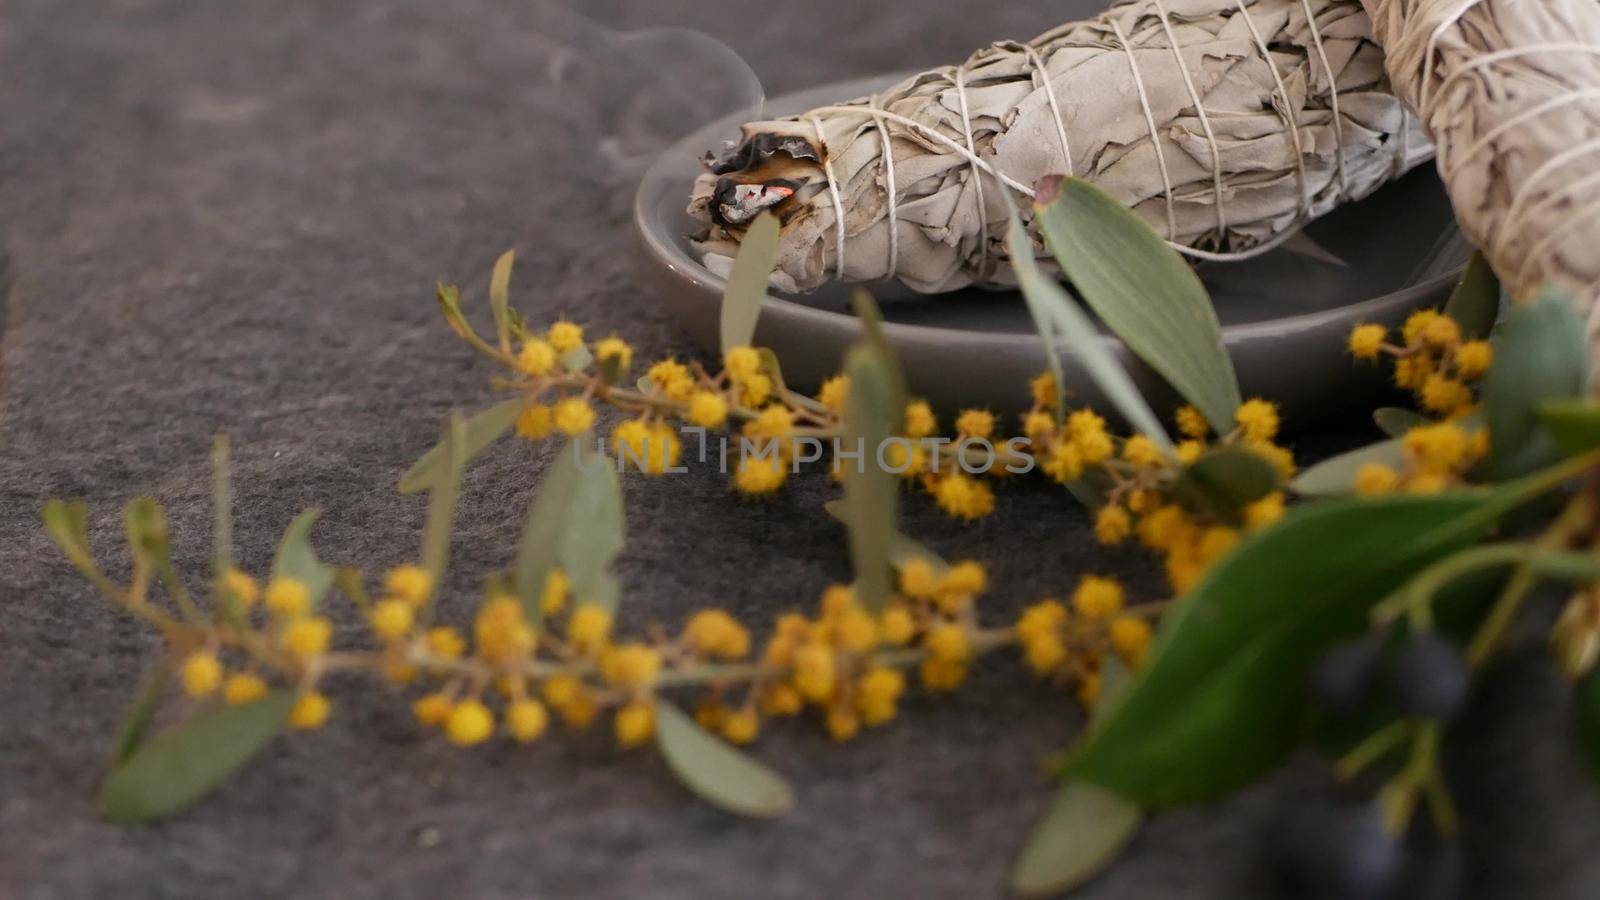 Dried white sage smudge stick, relaxation and aromatherapy. Smudging during psychic occult ceremony, herbal healing, yoga or aura cleaning. Essential incense for esoteric rituals and fortune telling by DogoraSun